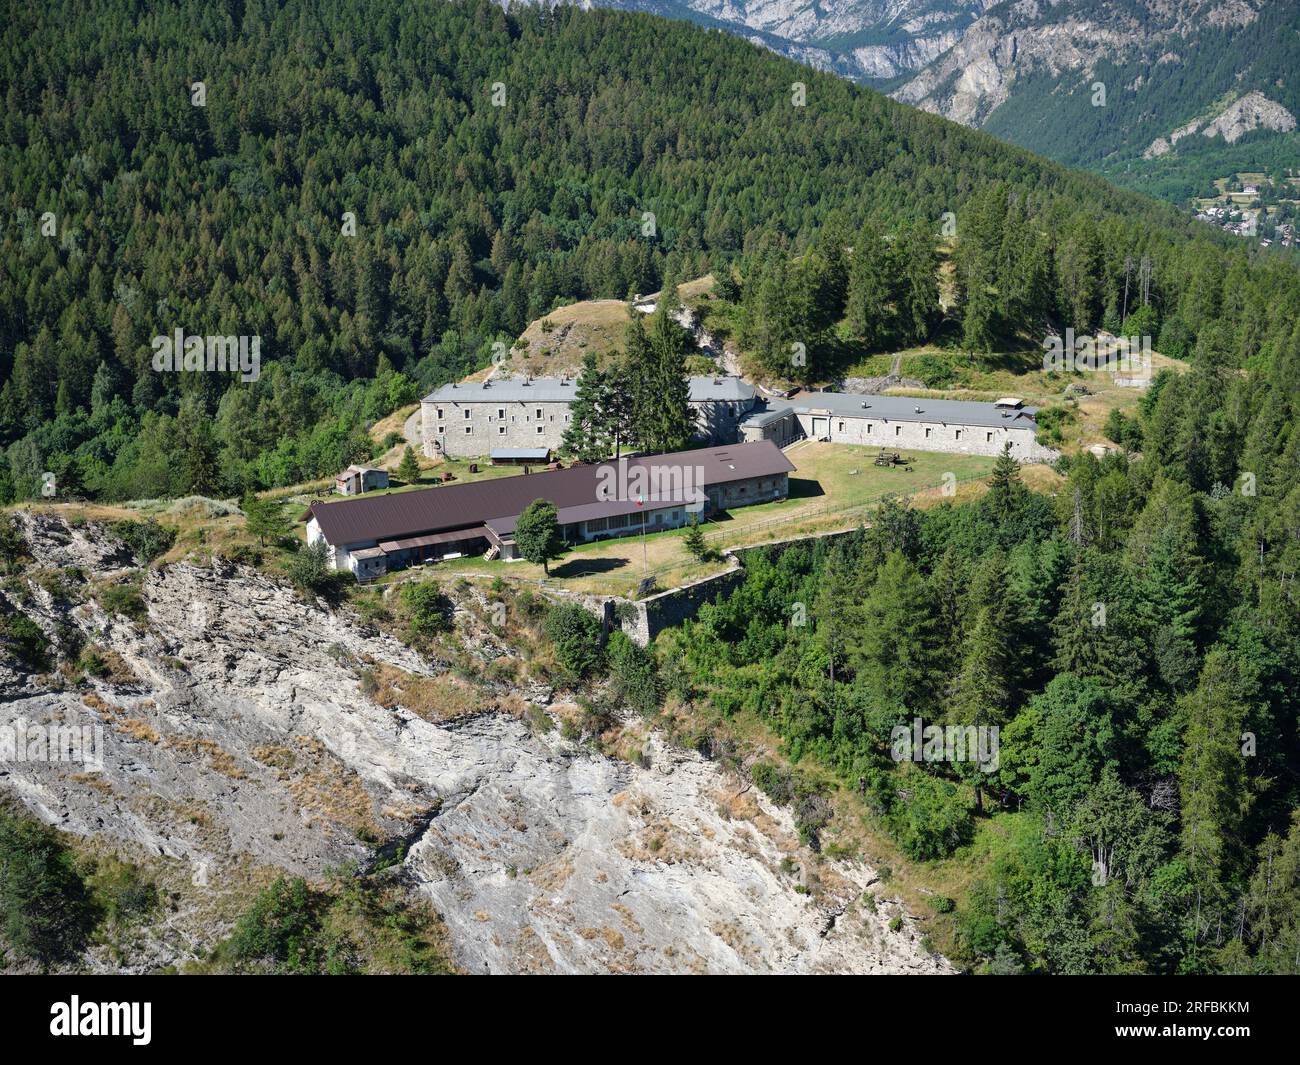 AERIAL VIEW. Bramafam Fort, a military fortification on a clifftop overlooking the upper Susa Valley. Bardonecchia, Metropolitan City of Turin, Italy. Stock Photo